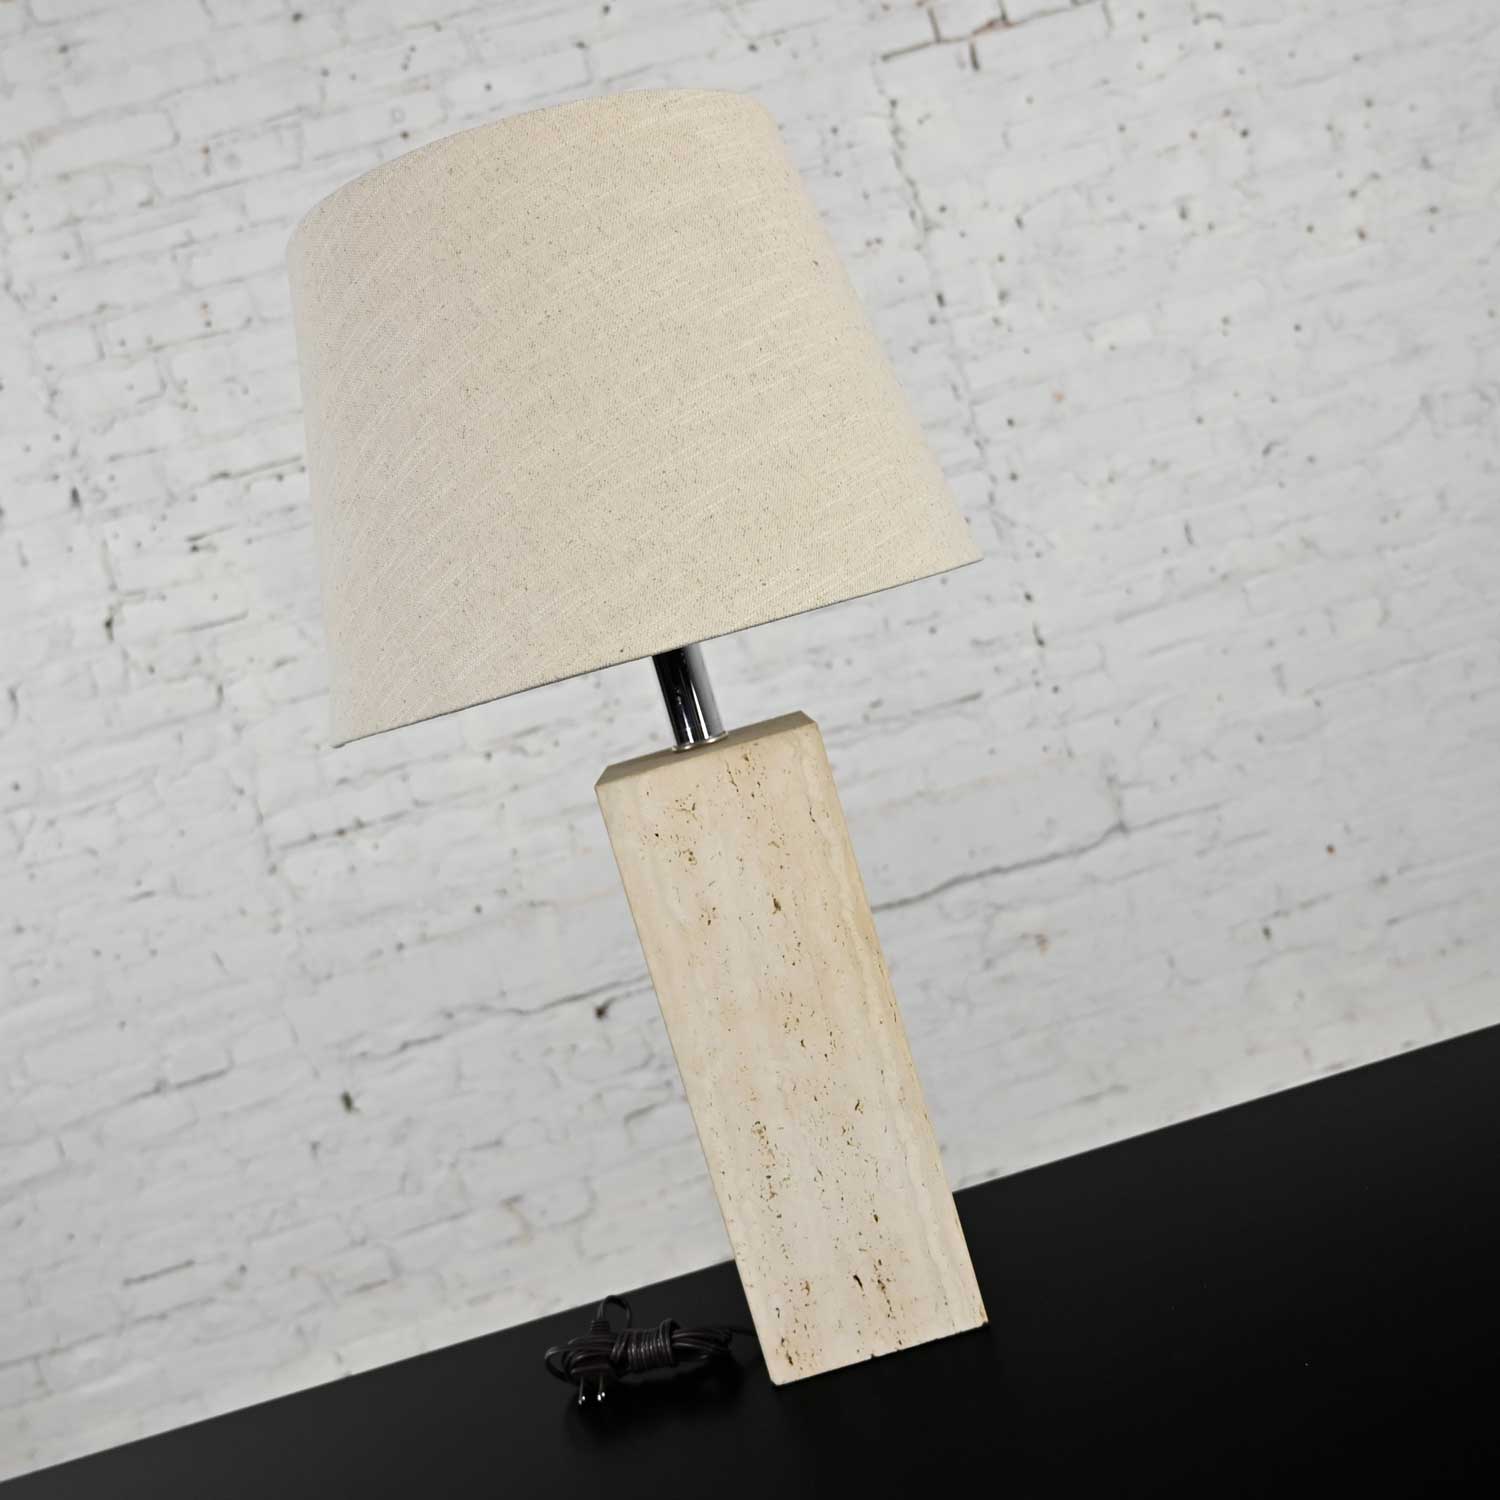 Vintage Modern Travertine Square Block Table Lamp with Oatmeal Linen Tapered Drum Shade